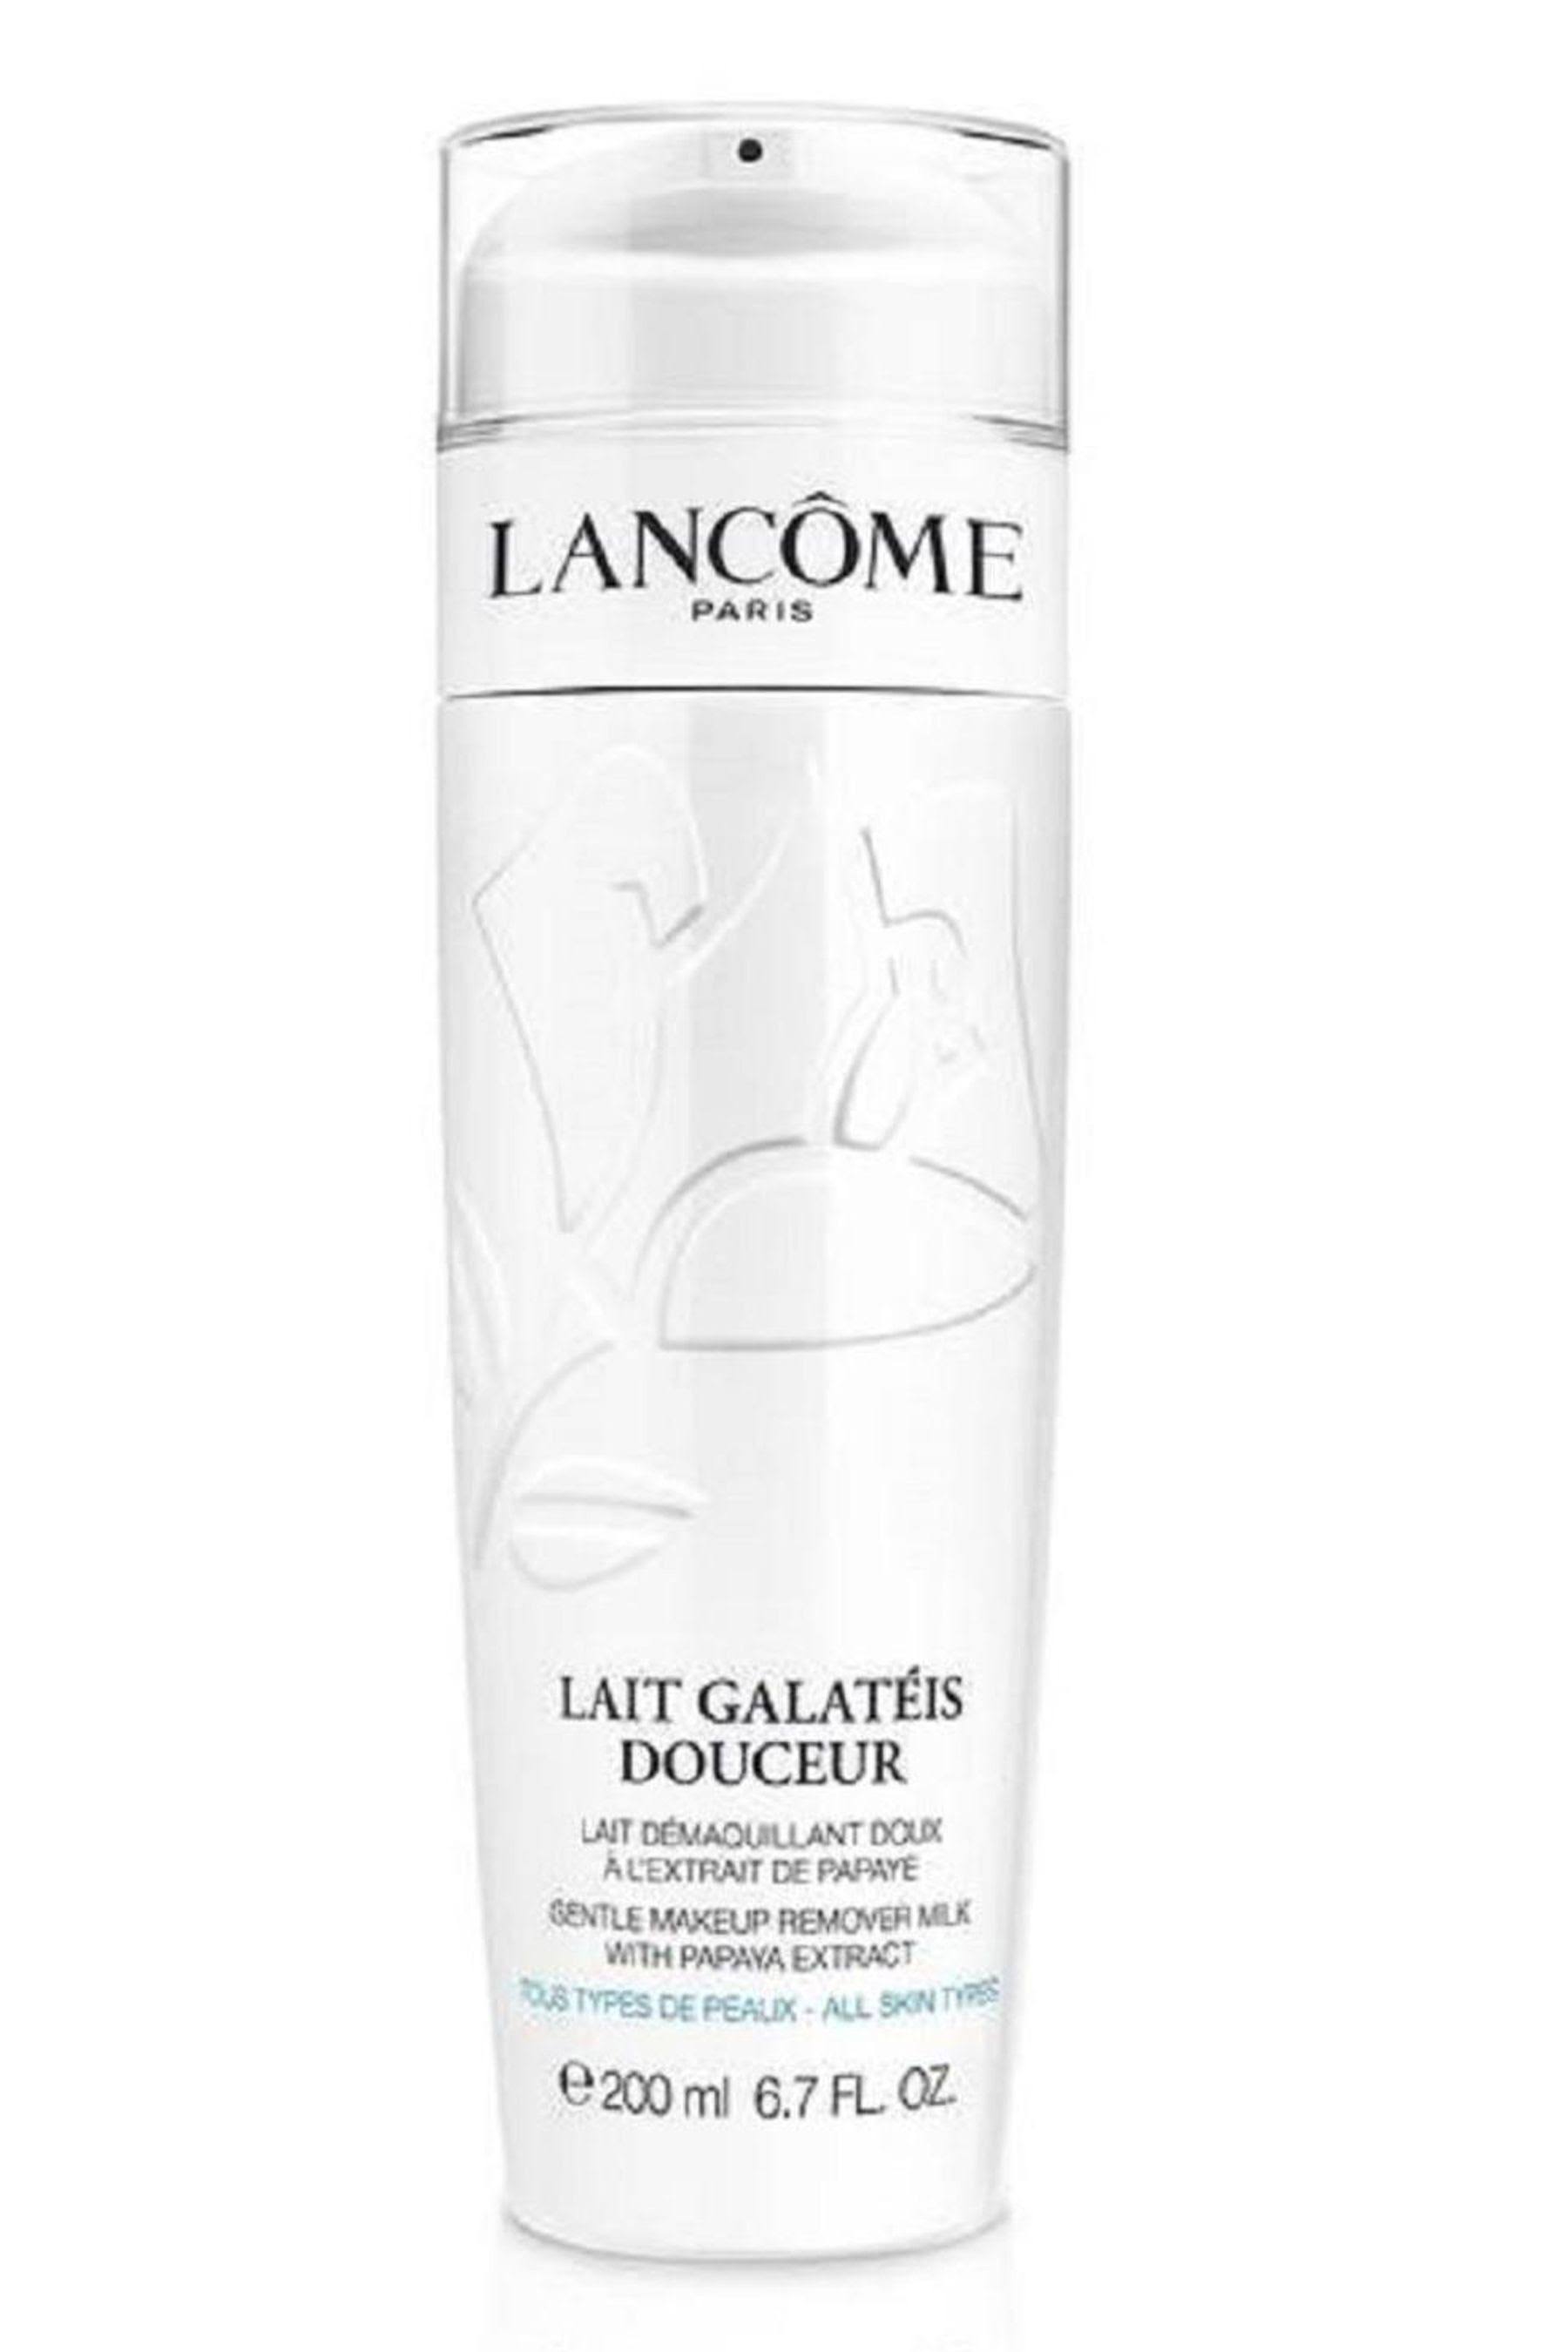 Lancome Galateis Douceur Gentle Softening Cleansing Fluid for Face & Eyes - 400ml